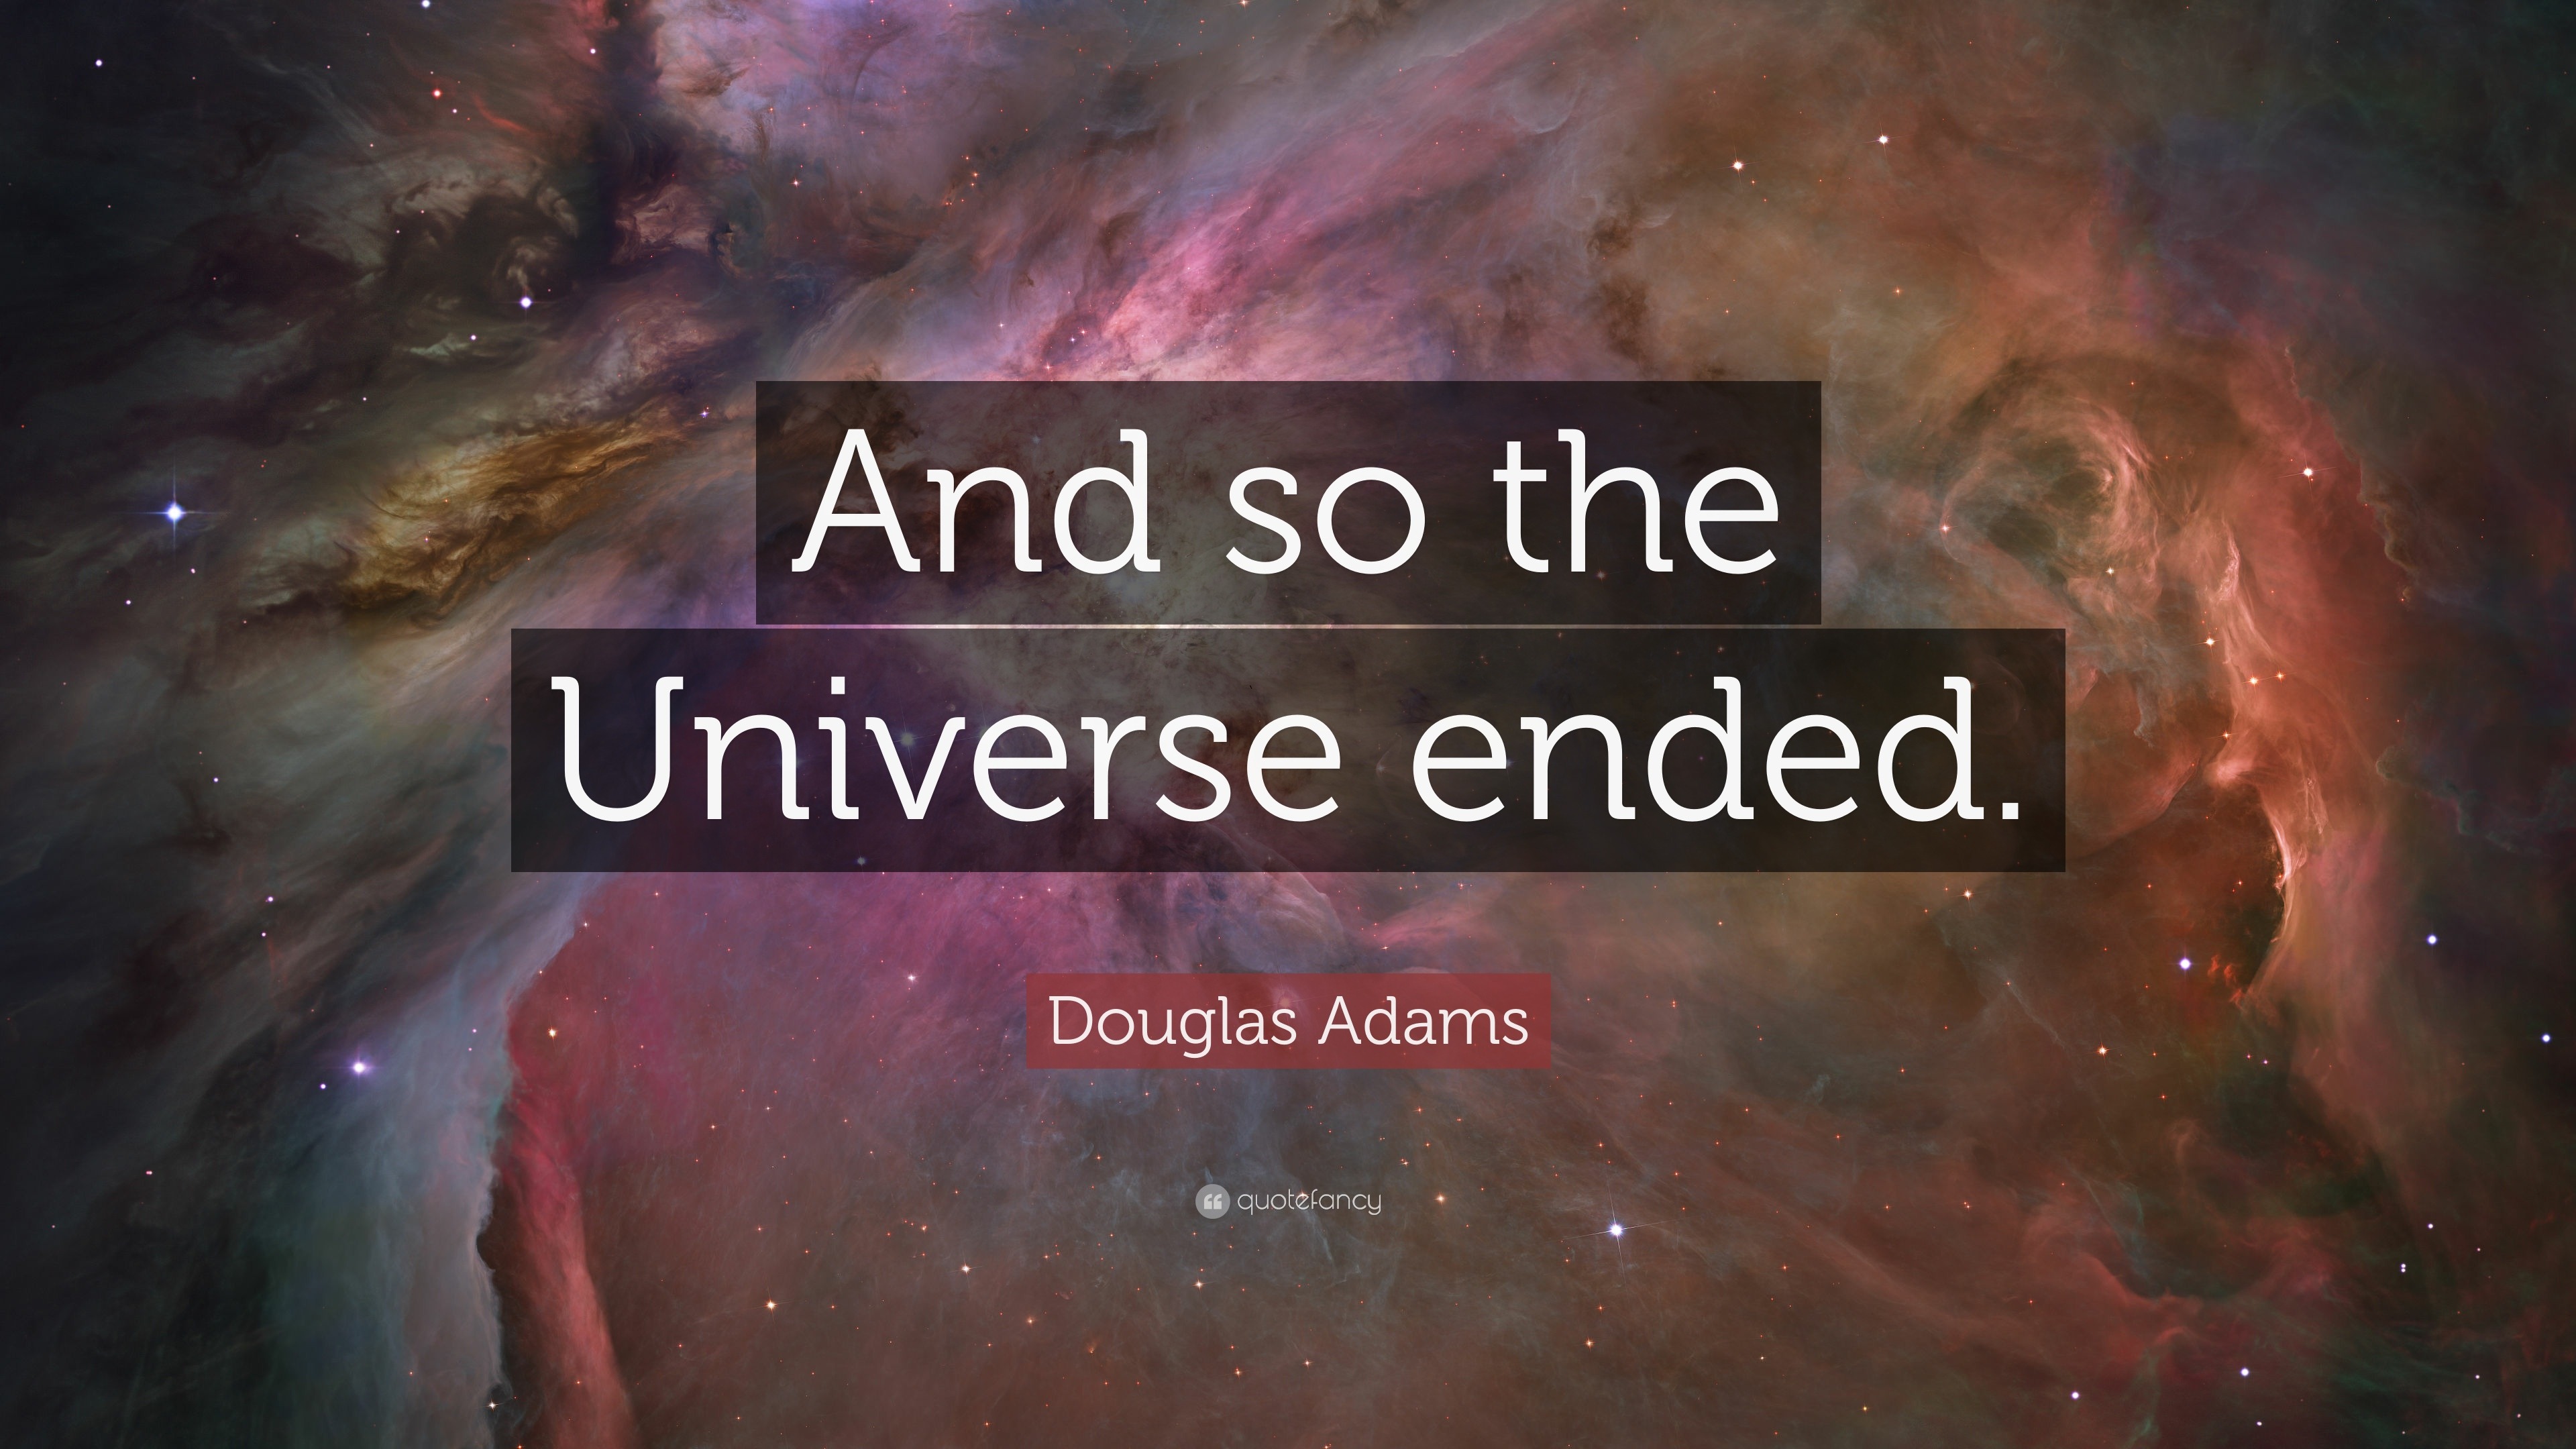 douglas adams restaurant at the end of the universe